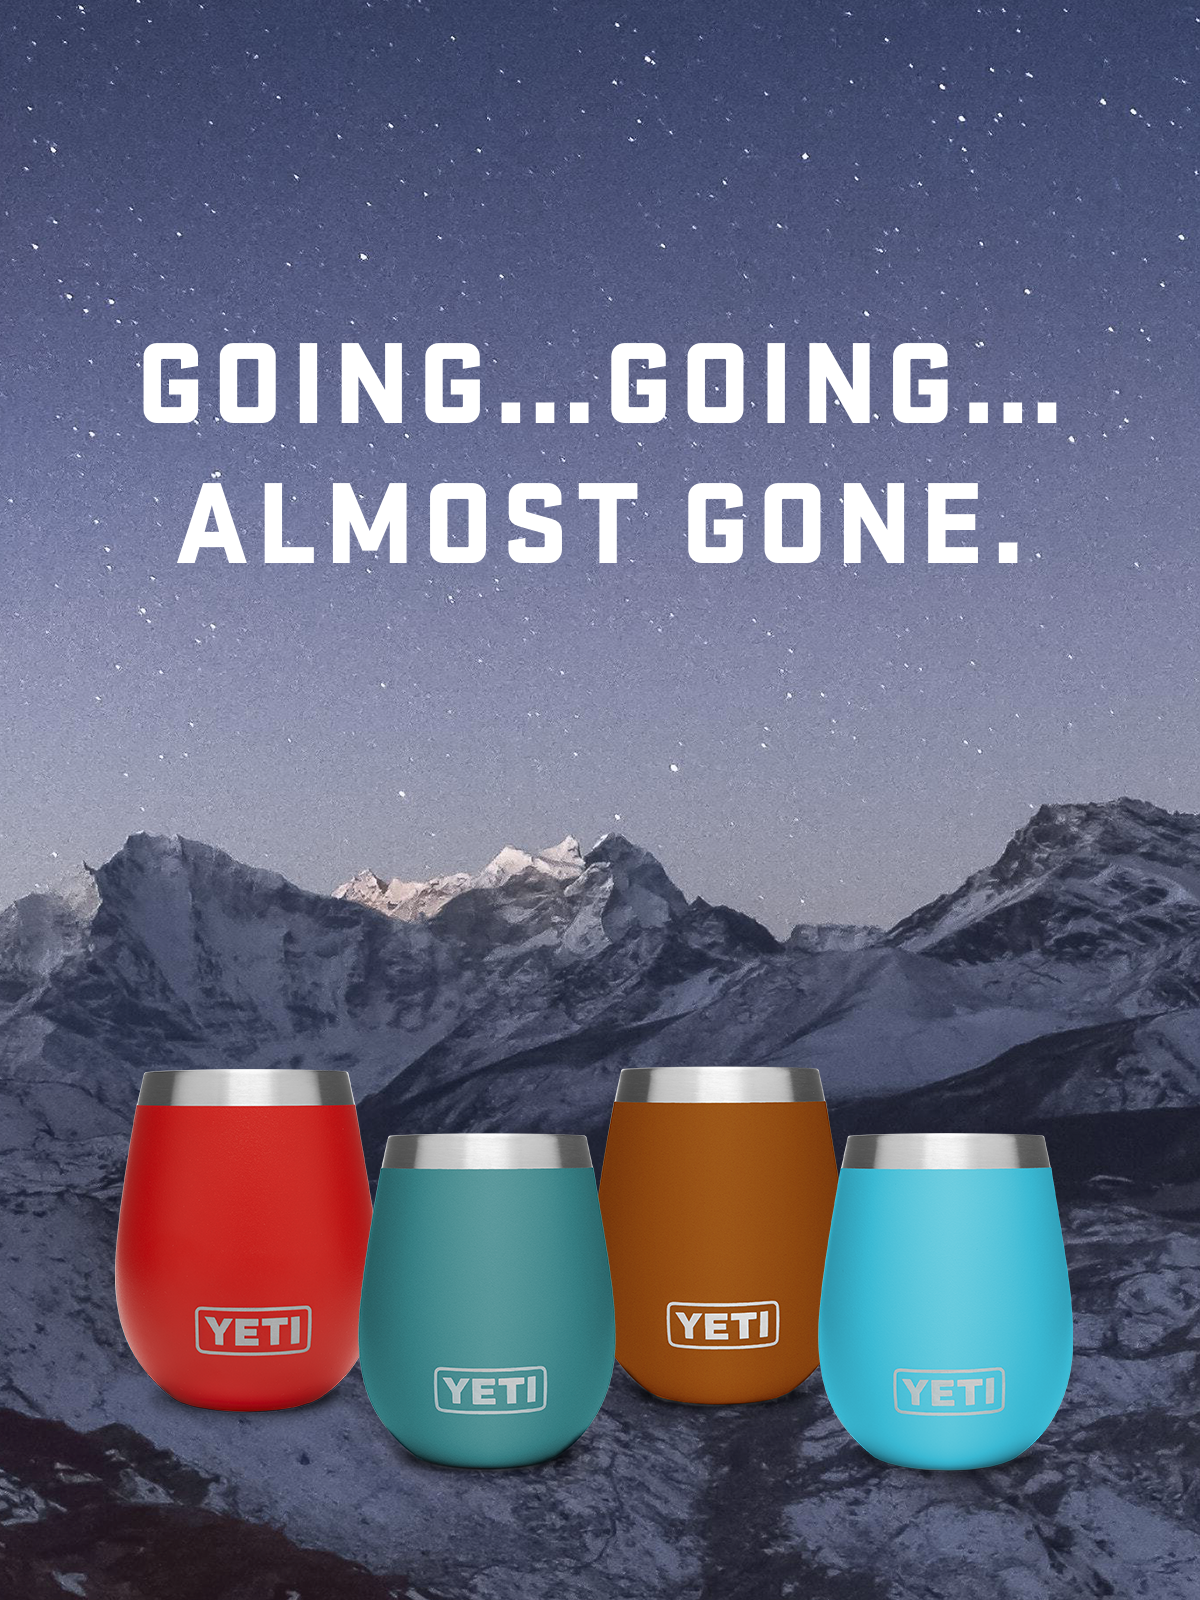 Yeti Has Ramblers and a Dog Bed for 25% Off Until Supplies Last - Parade